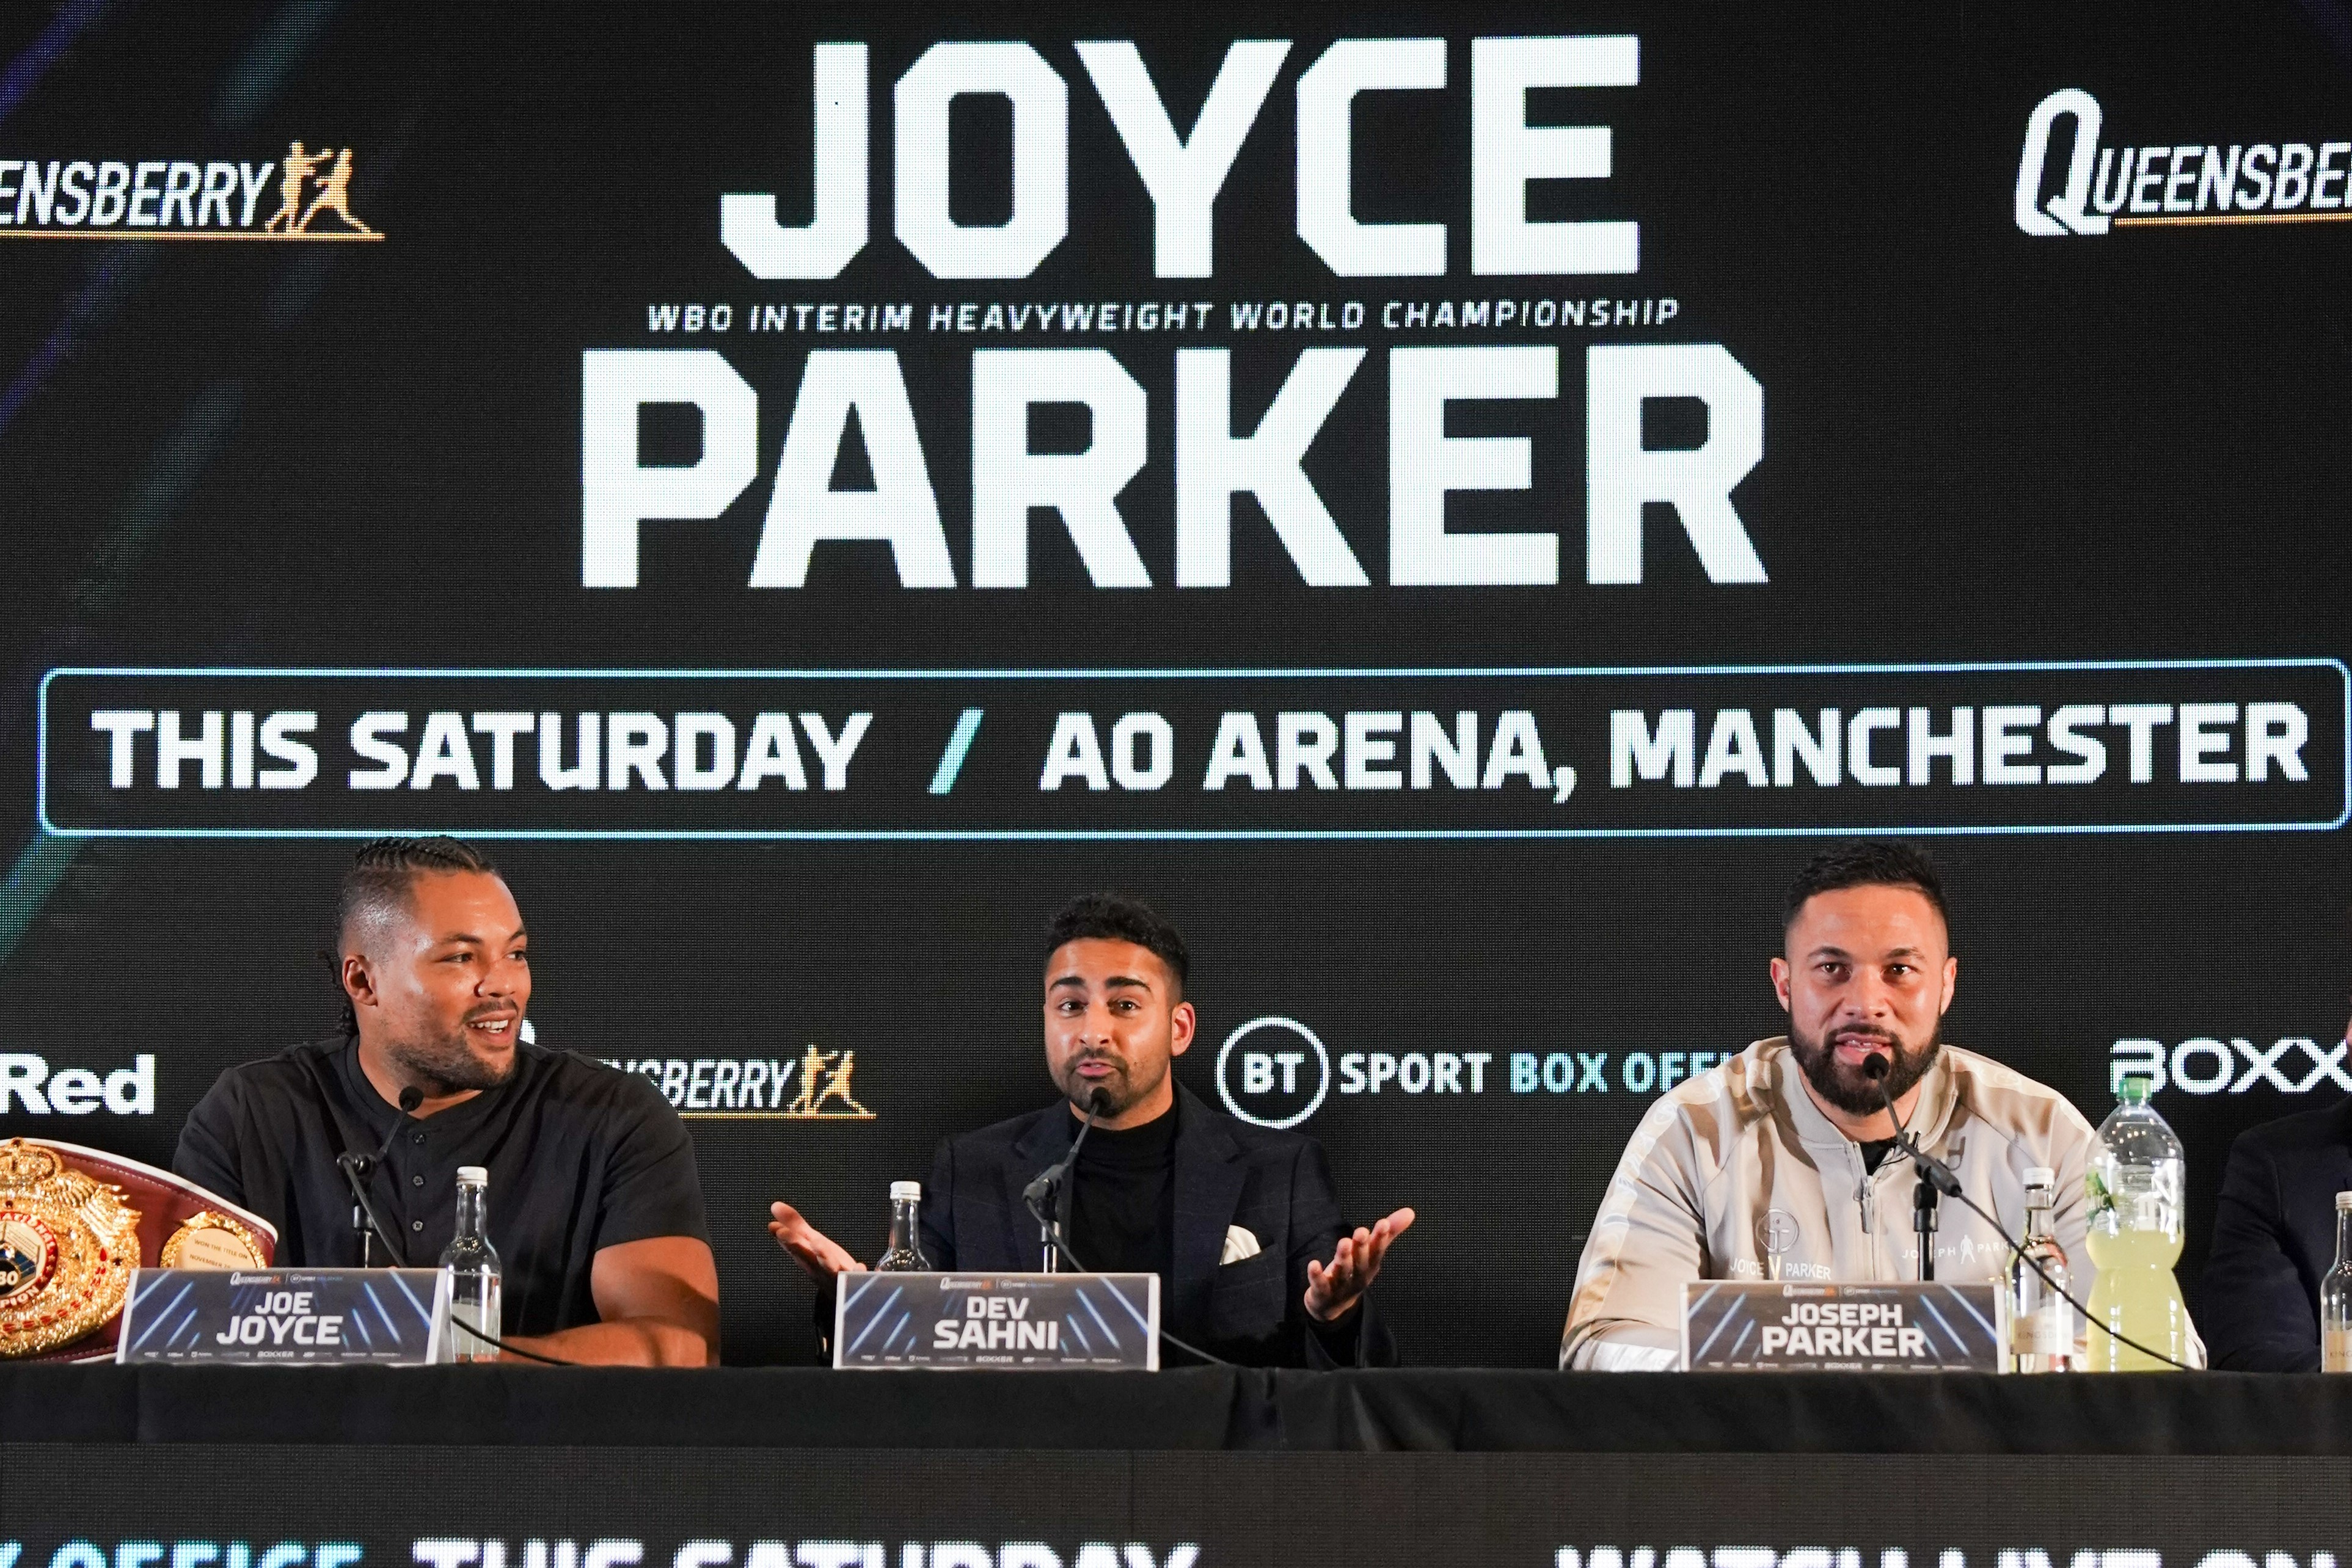 Joe Joyce vs Joseph Parker Boxing Fight 2022 Latest news, fight card, date, time, how to watch, odds and everything you need to know Ultimate Guide